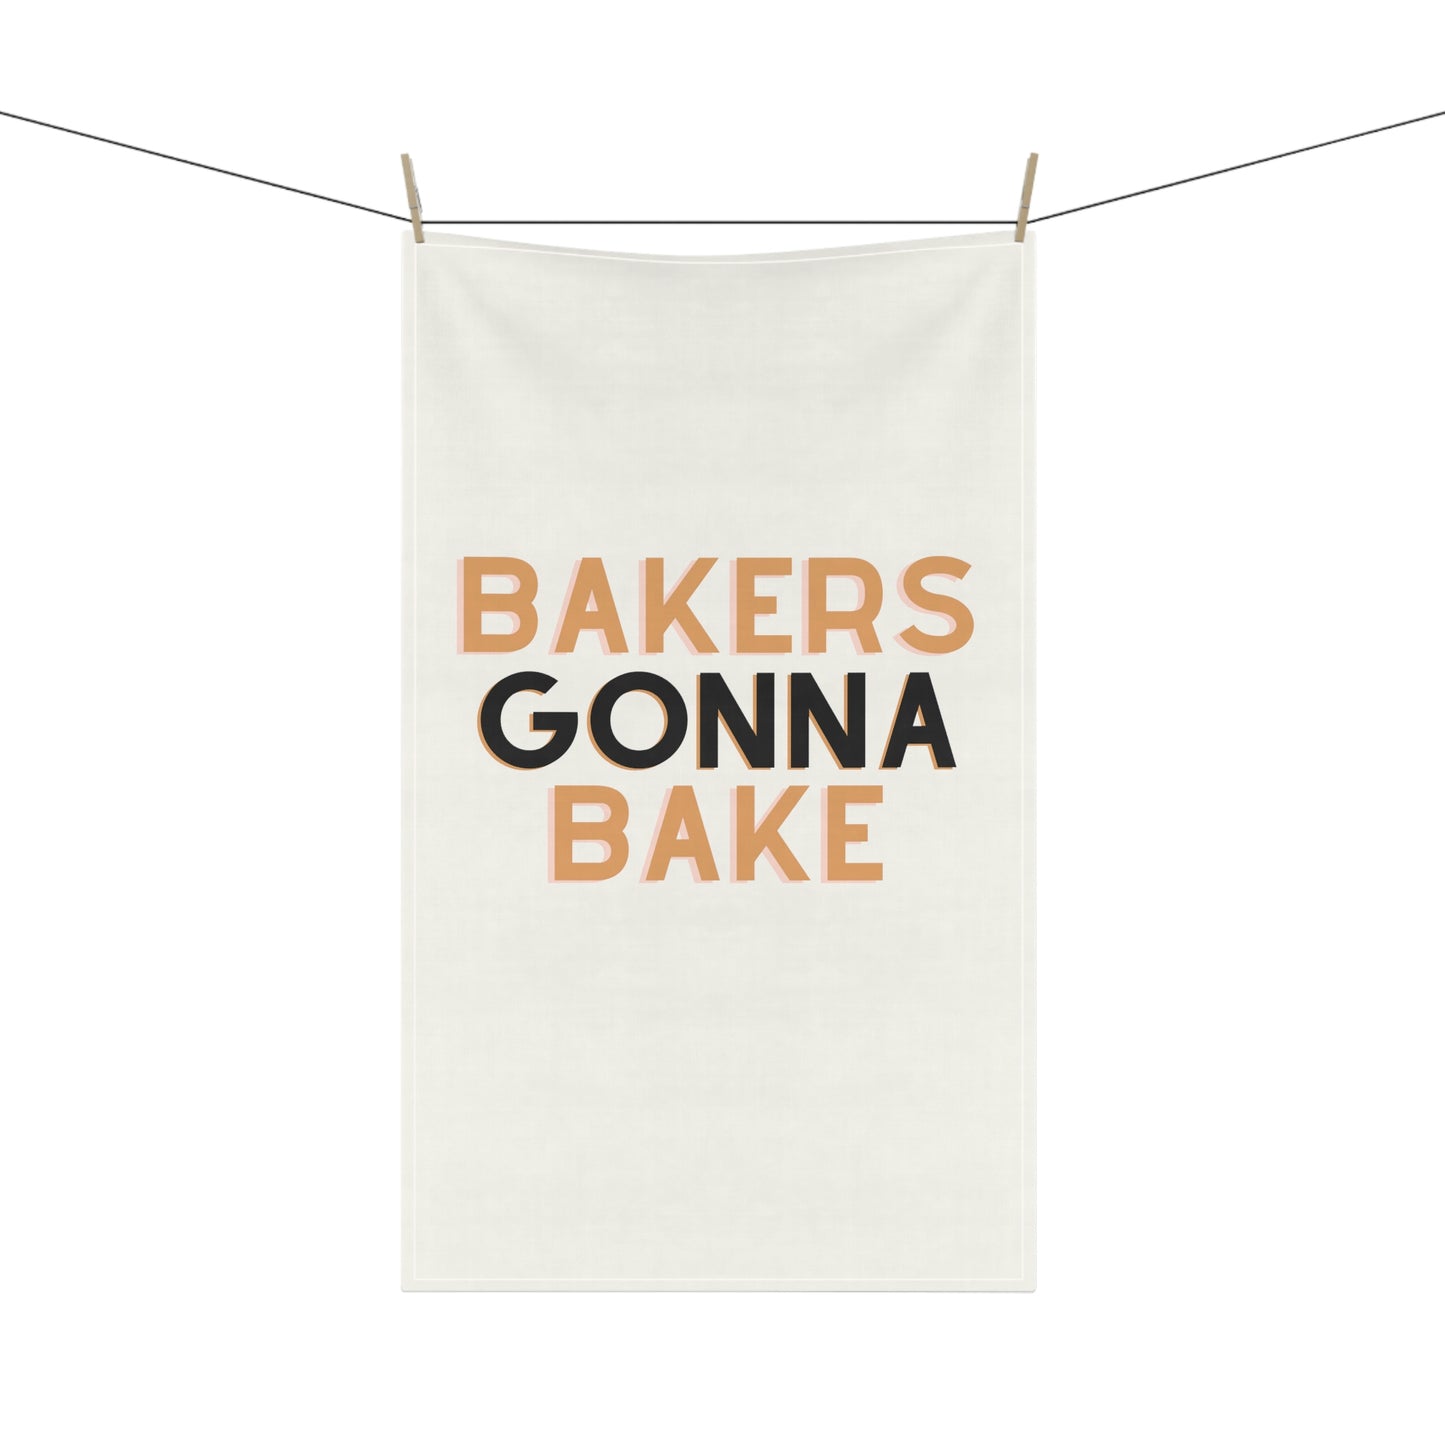 Versatile and expressive bakers towel in cotton material.